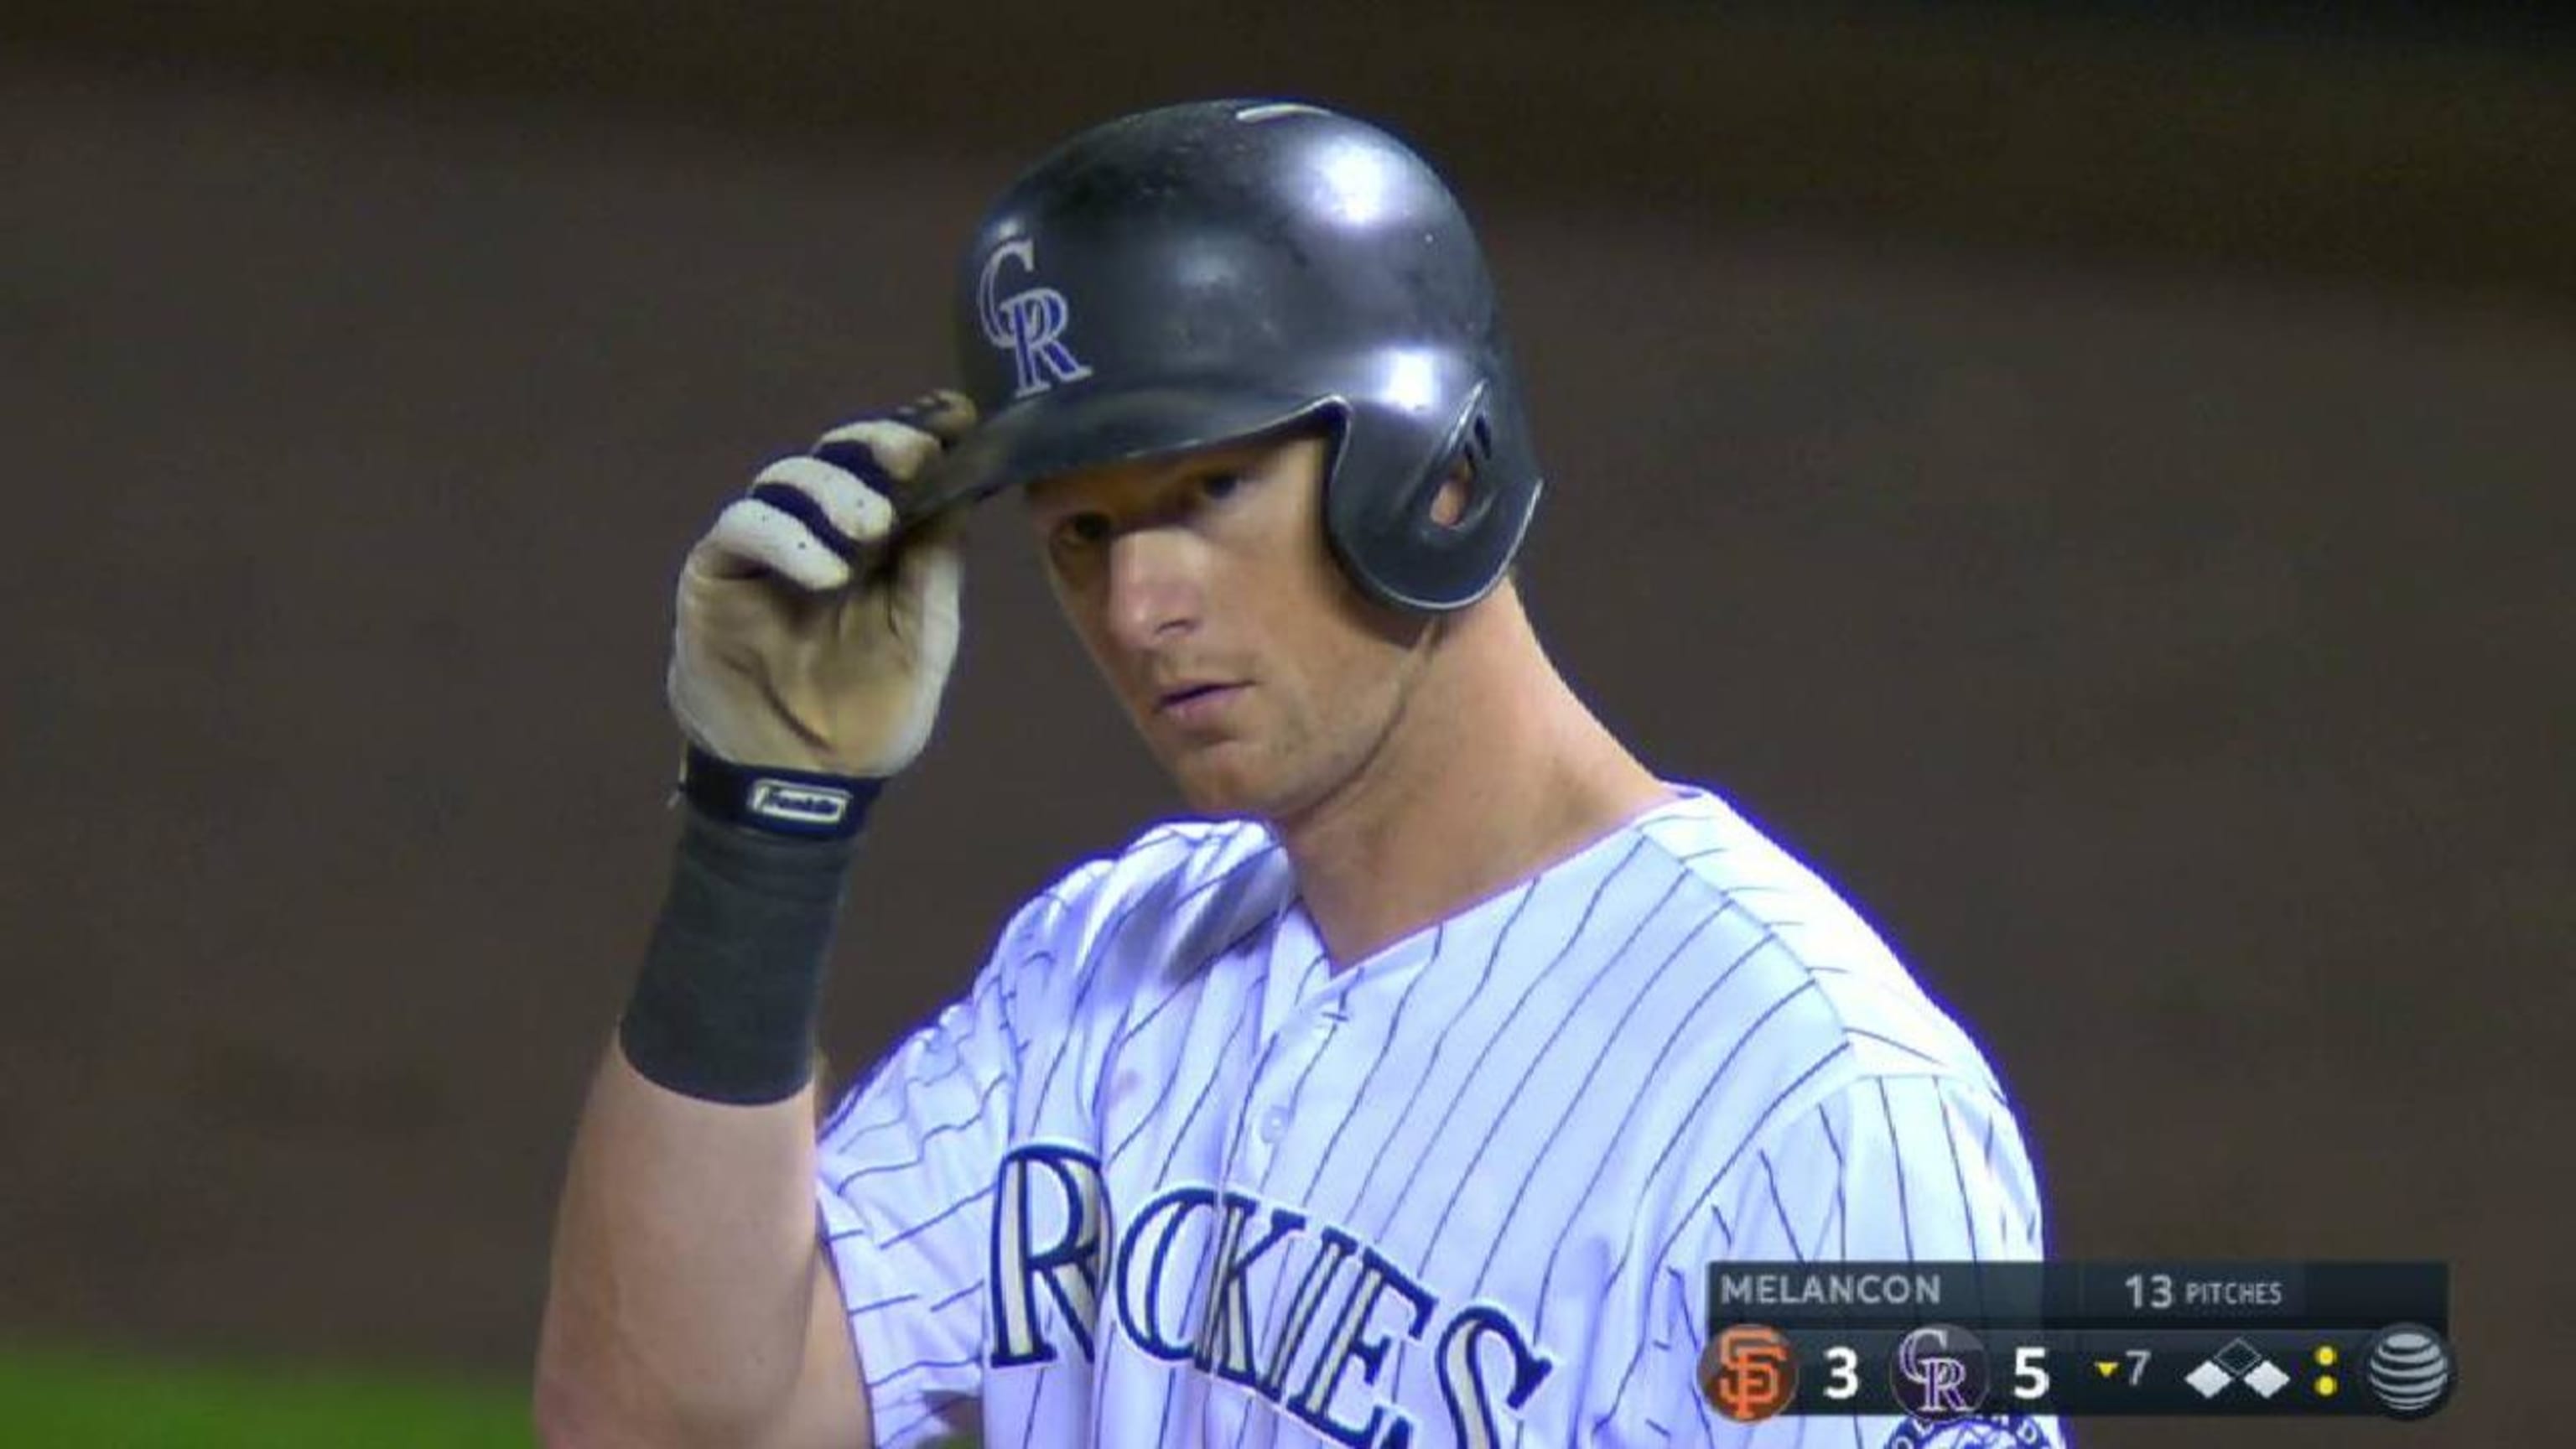 Trevor Story hit in head with pitch, remains in the game